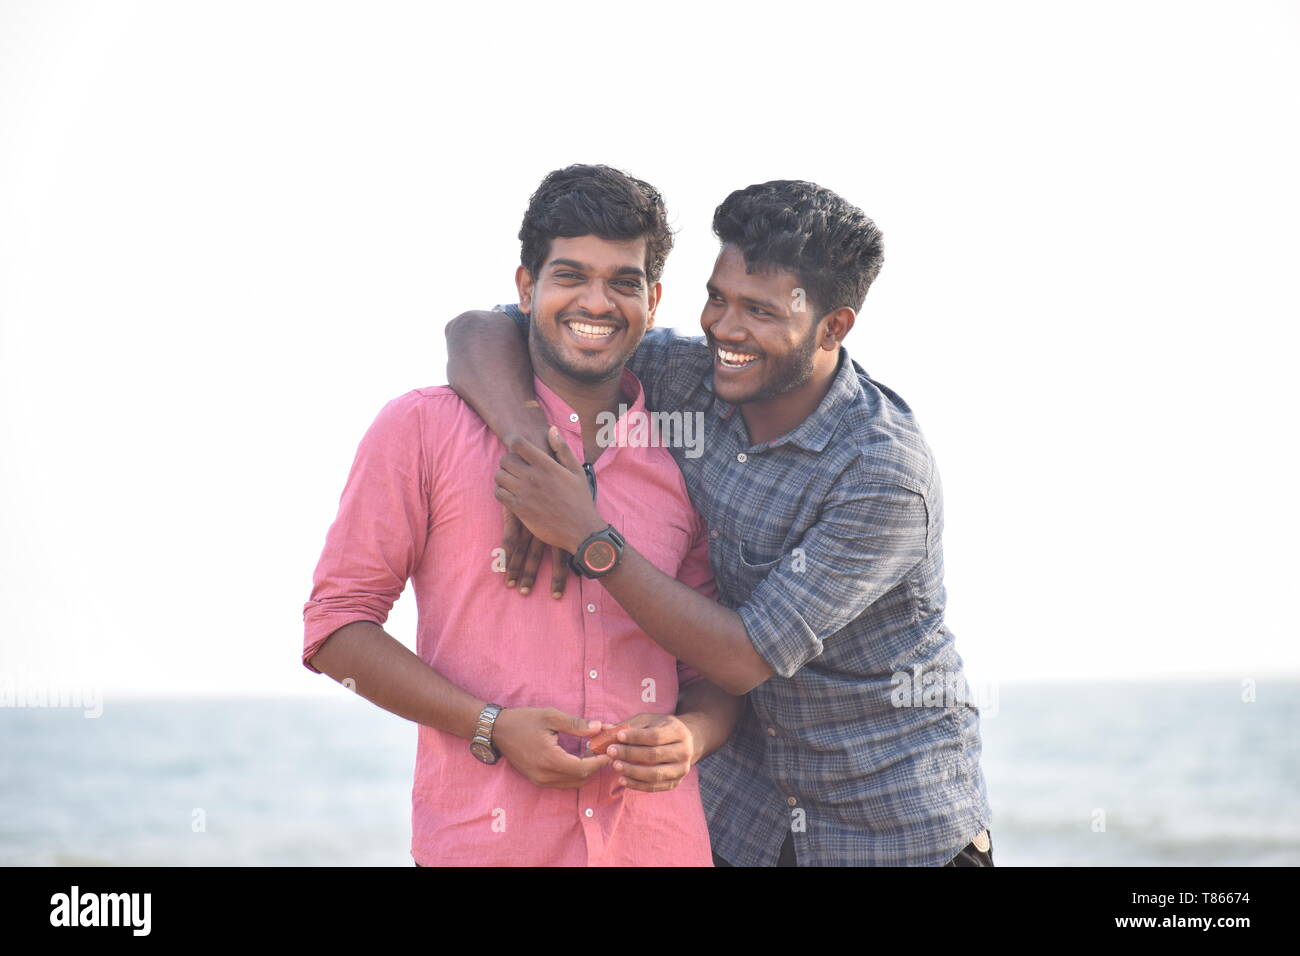 Best Friends laughing in seashore Stock Photo